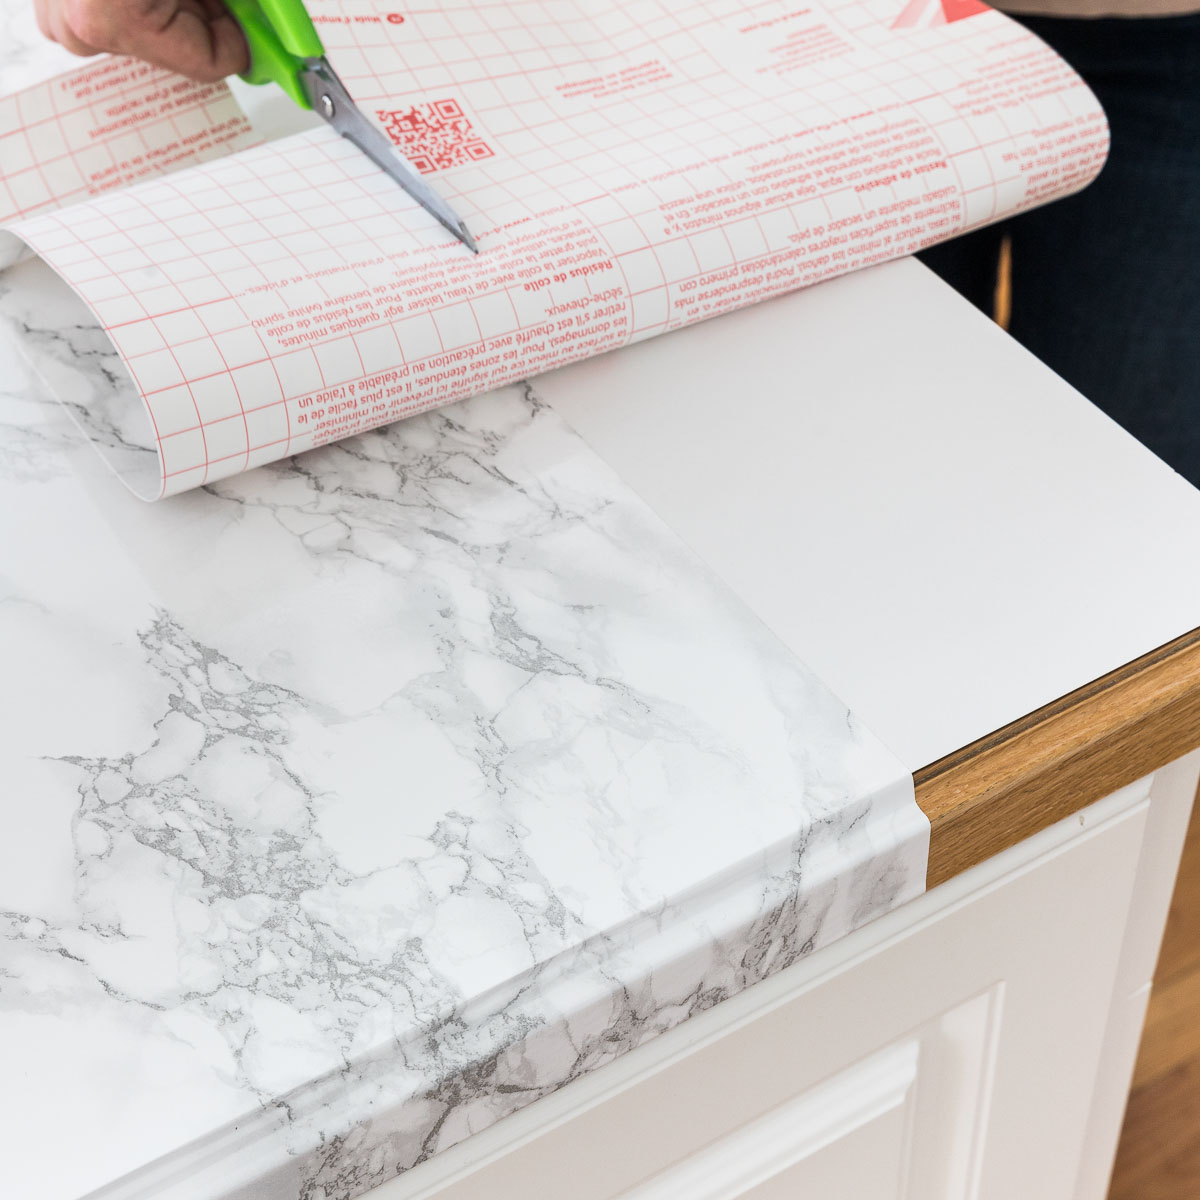 https://www.drivenbydecor.com/wp-content/uploads/2021/11/marble-contact-paper-countertops-featured.jpg